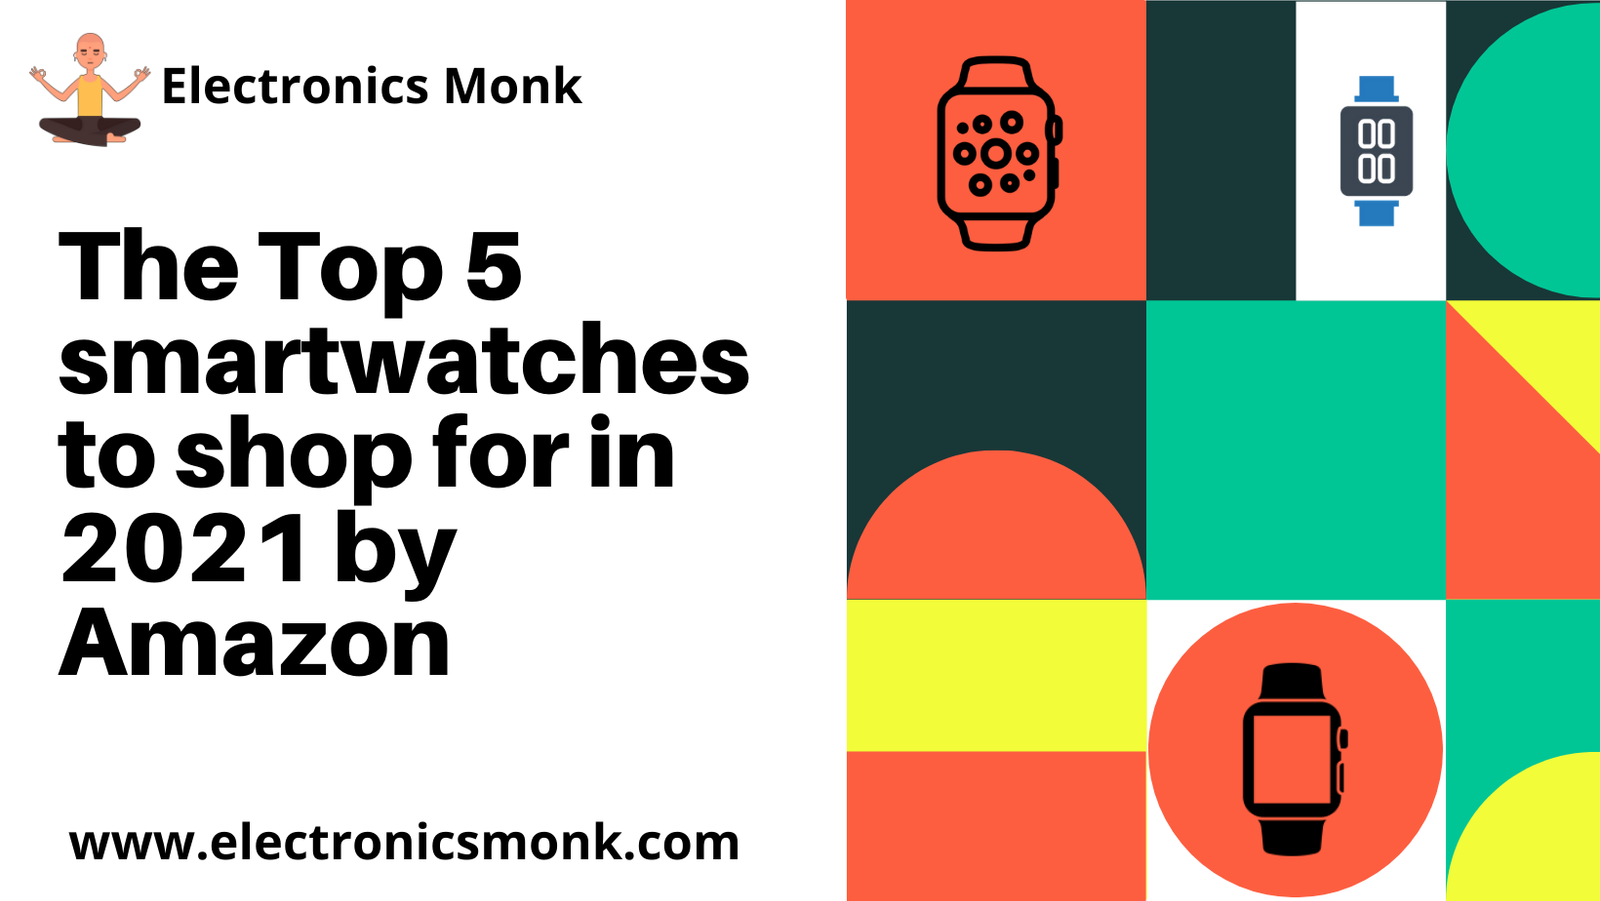 The Top 5 smartwatches to shop for in 2021 by Amazon